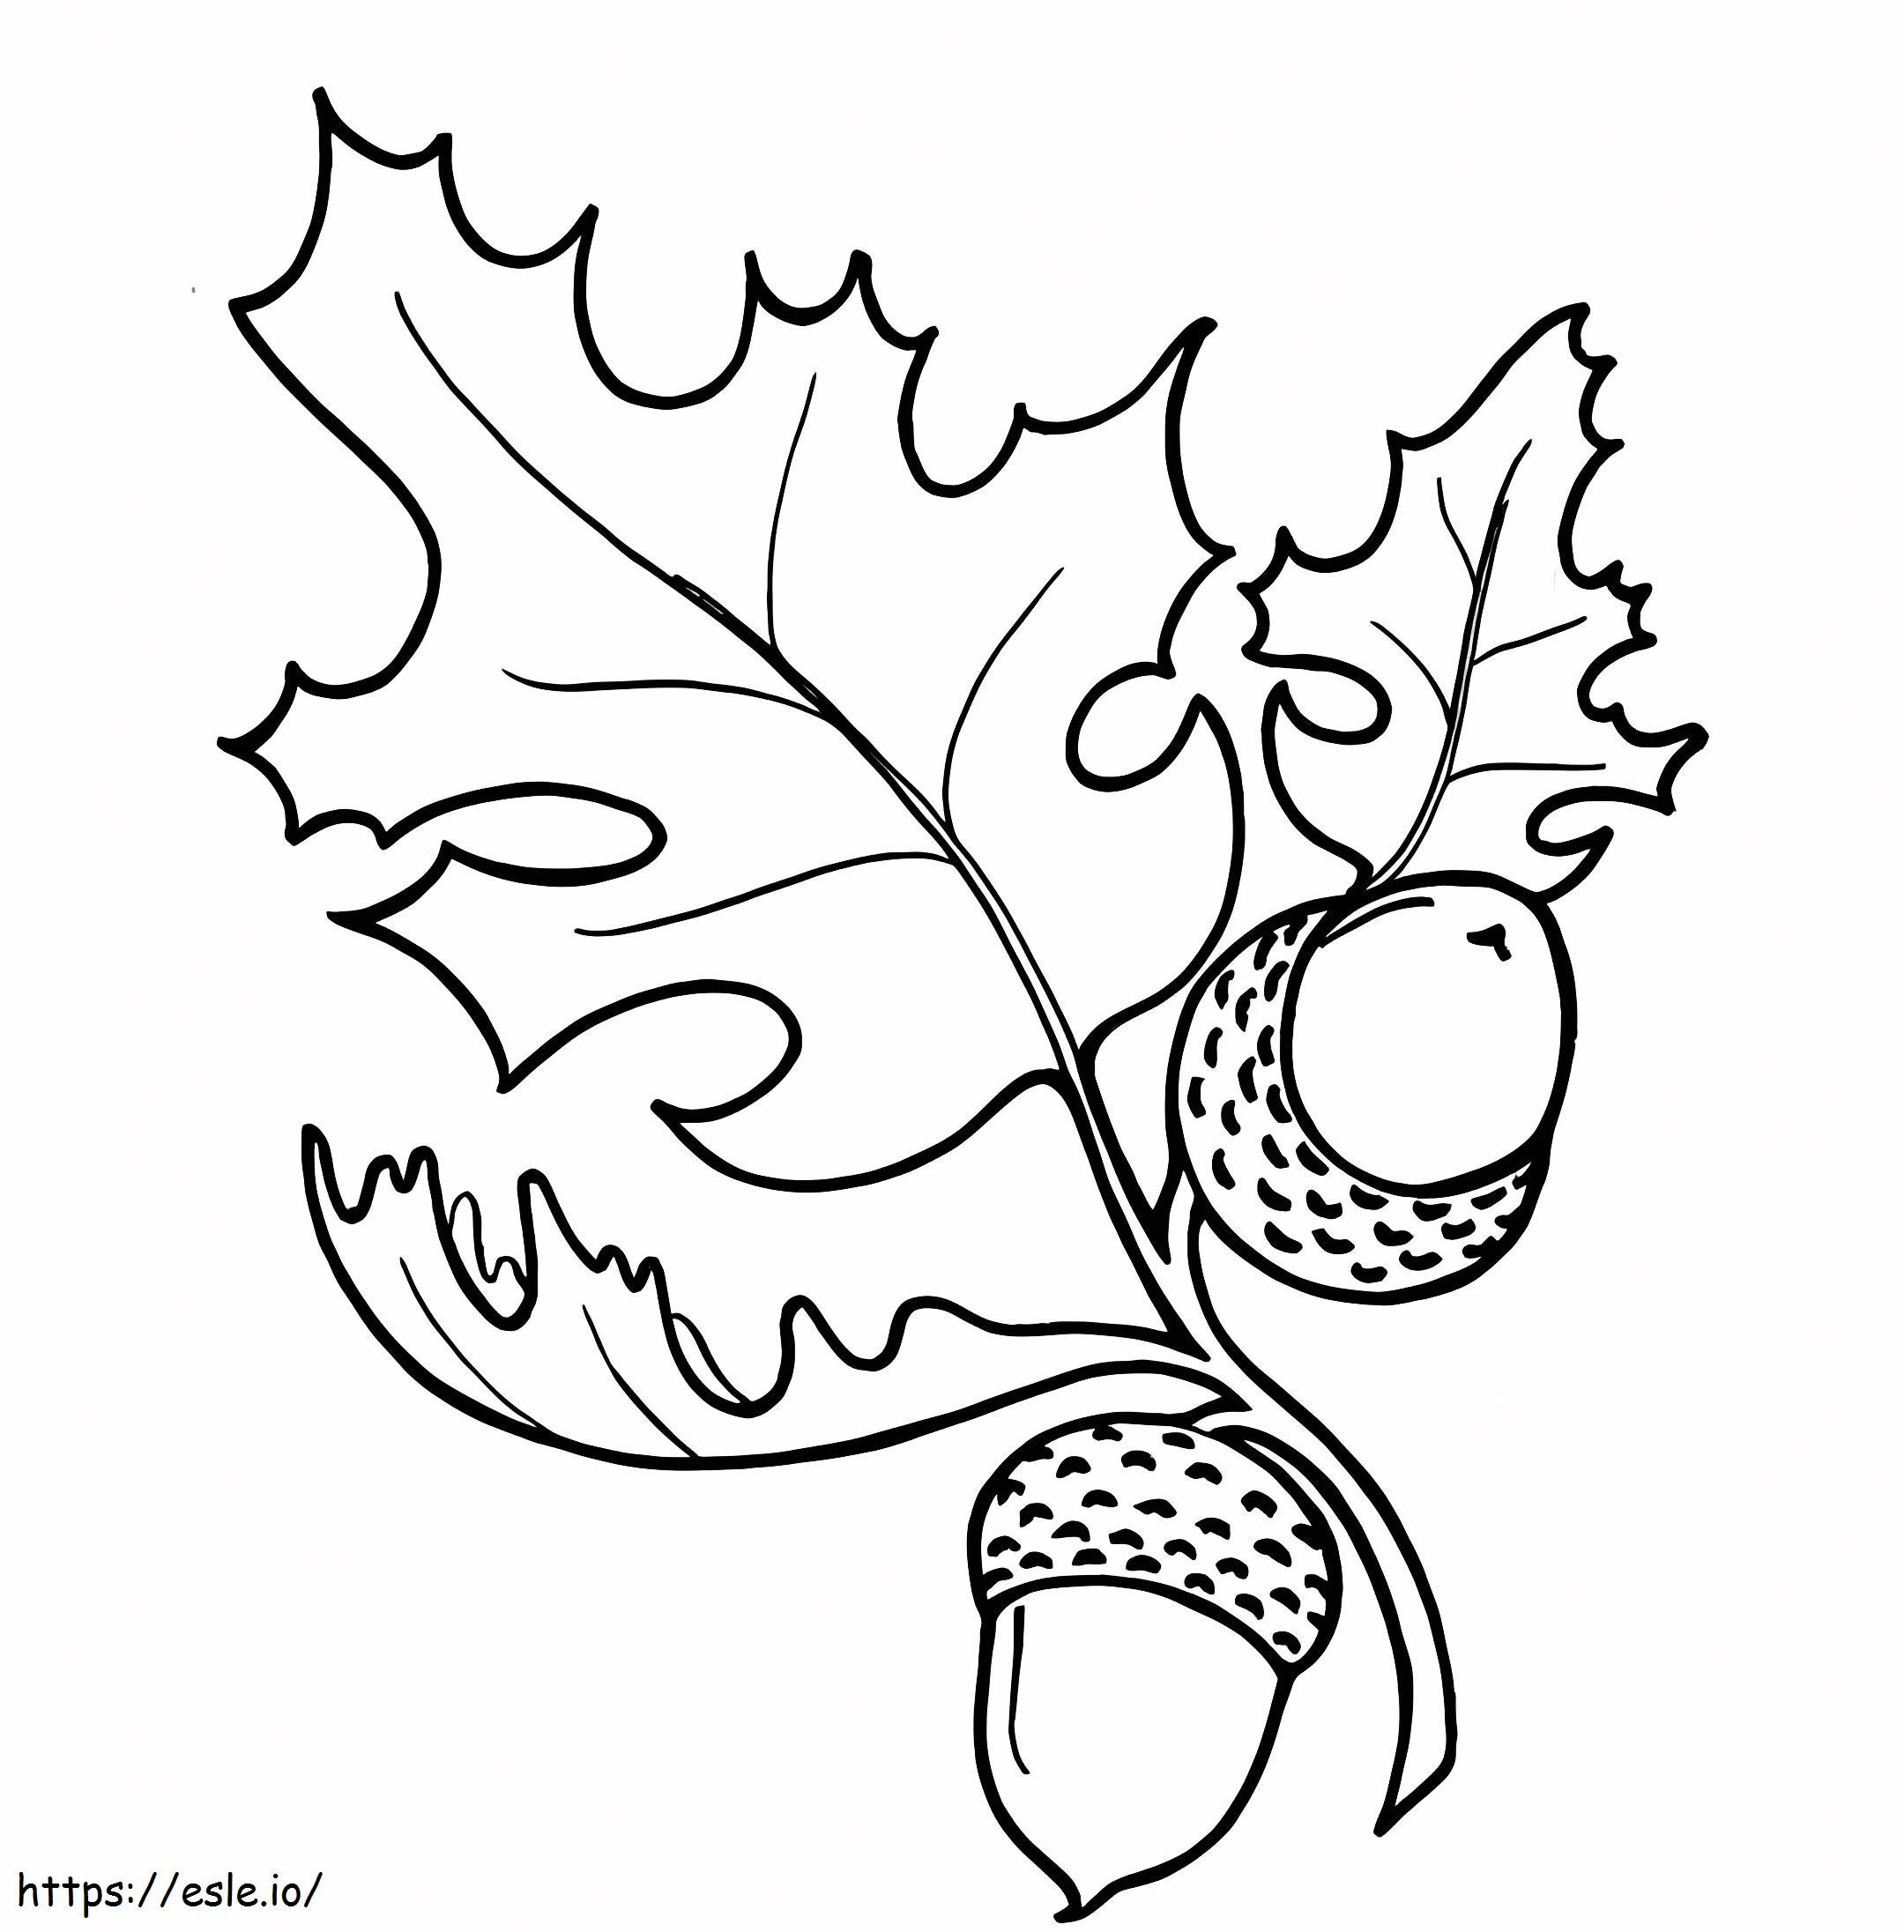 Two Acorn With Leaf coloring page